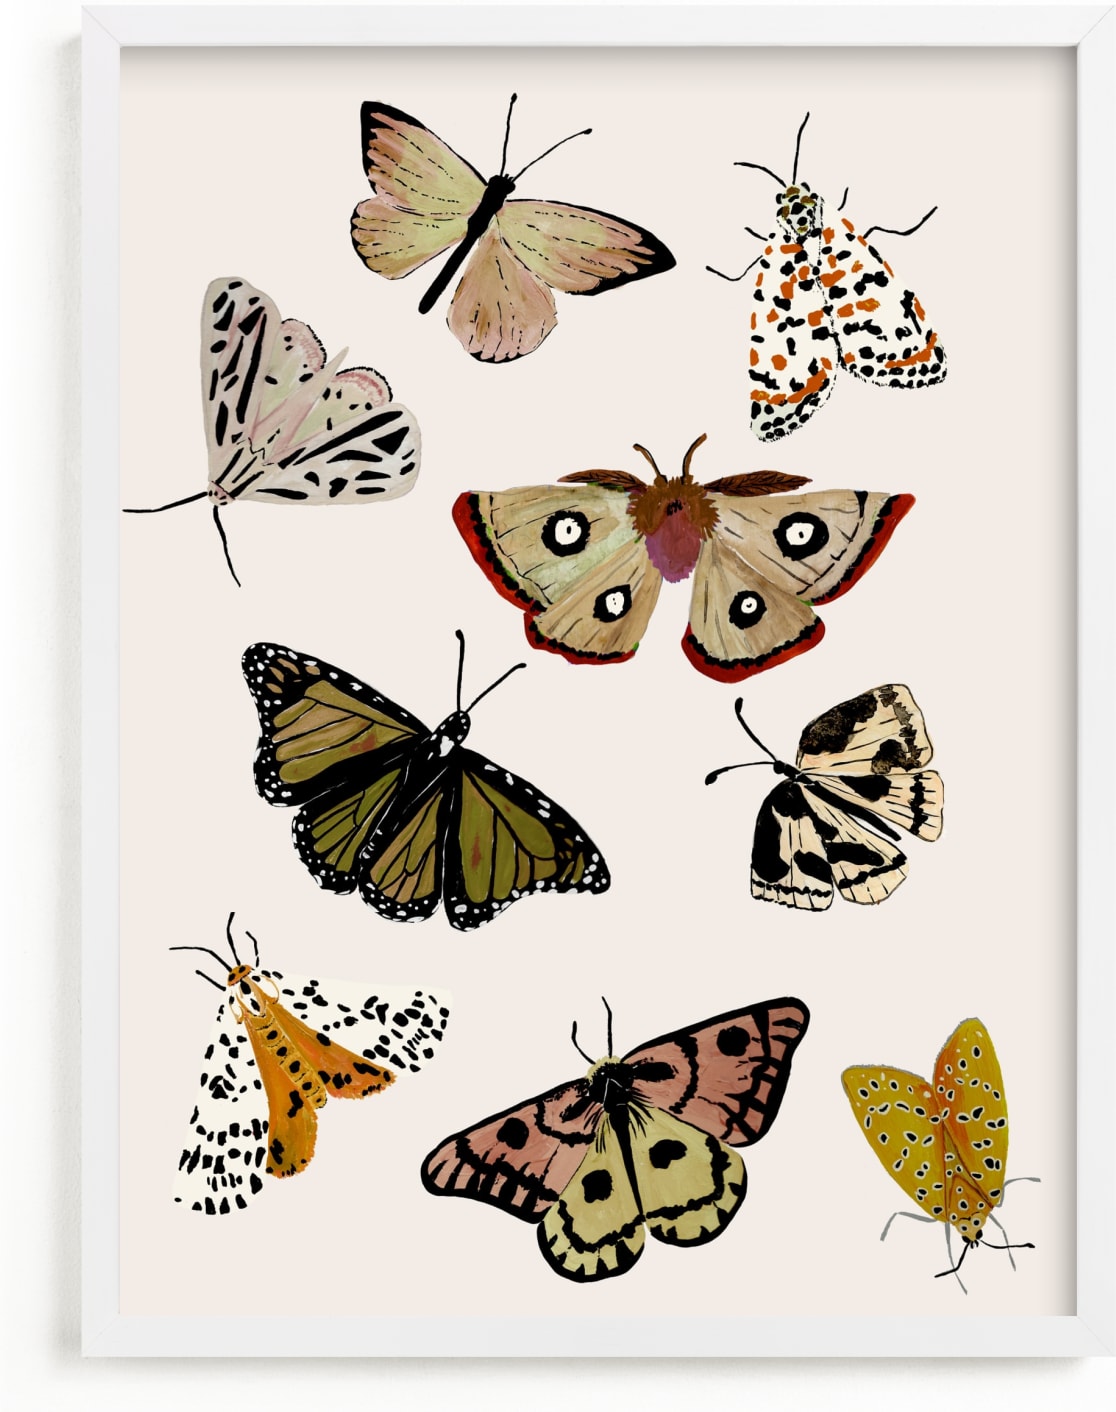 This is a colorful nursery wall art by Shannon Kirsten called Moths & Butterflies.